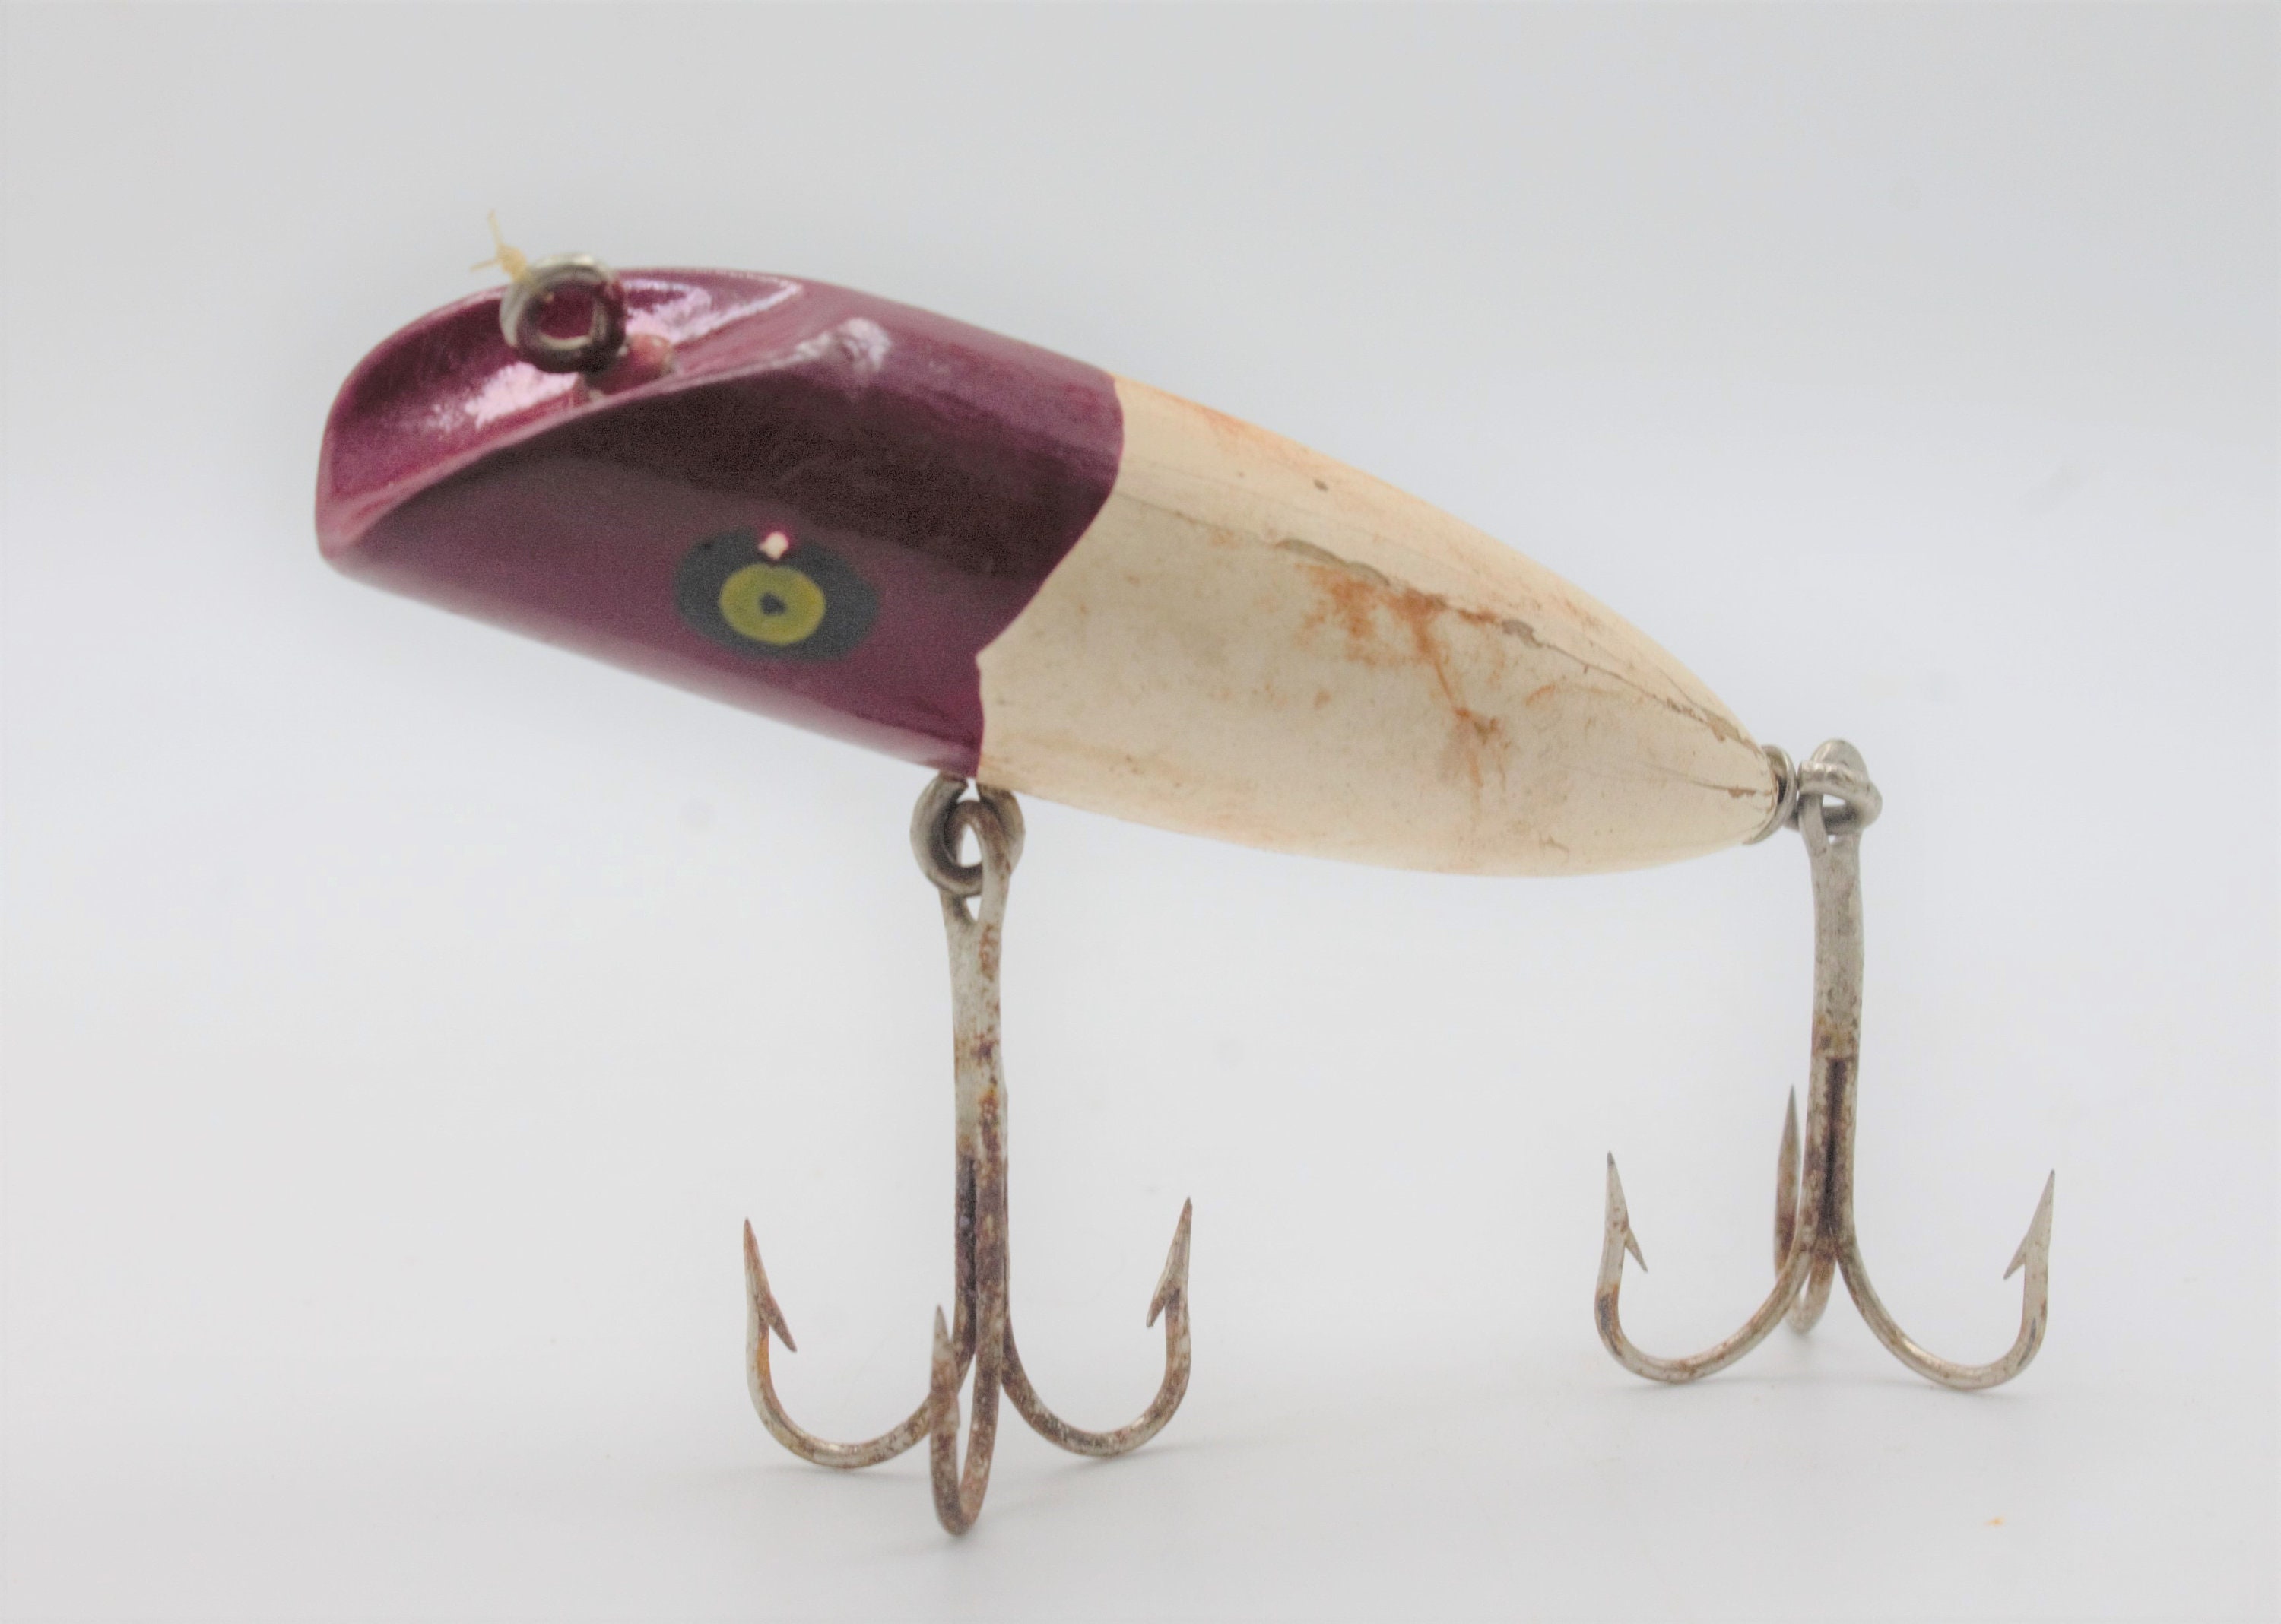 Vintage 1950's wooden hand painted fishing lure red and white yellow eyes  carved solid wood two treble hook